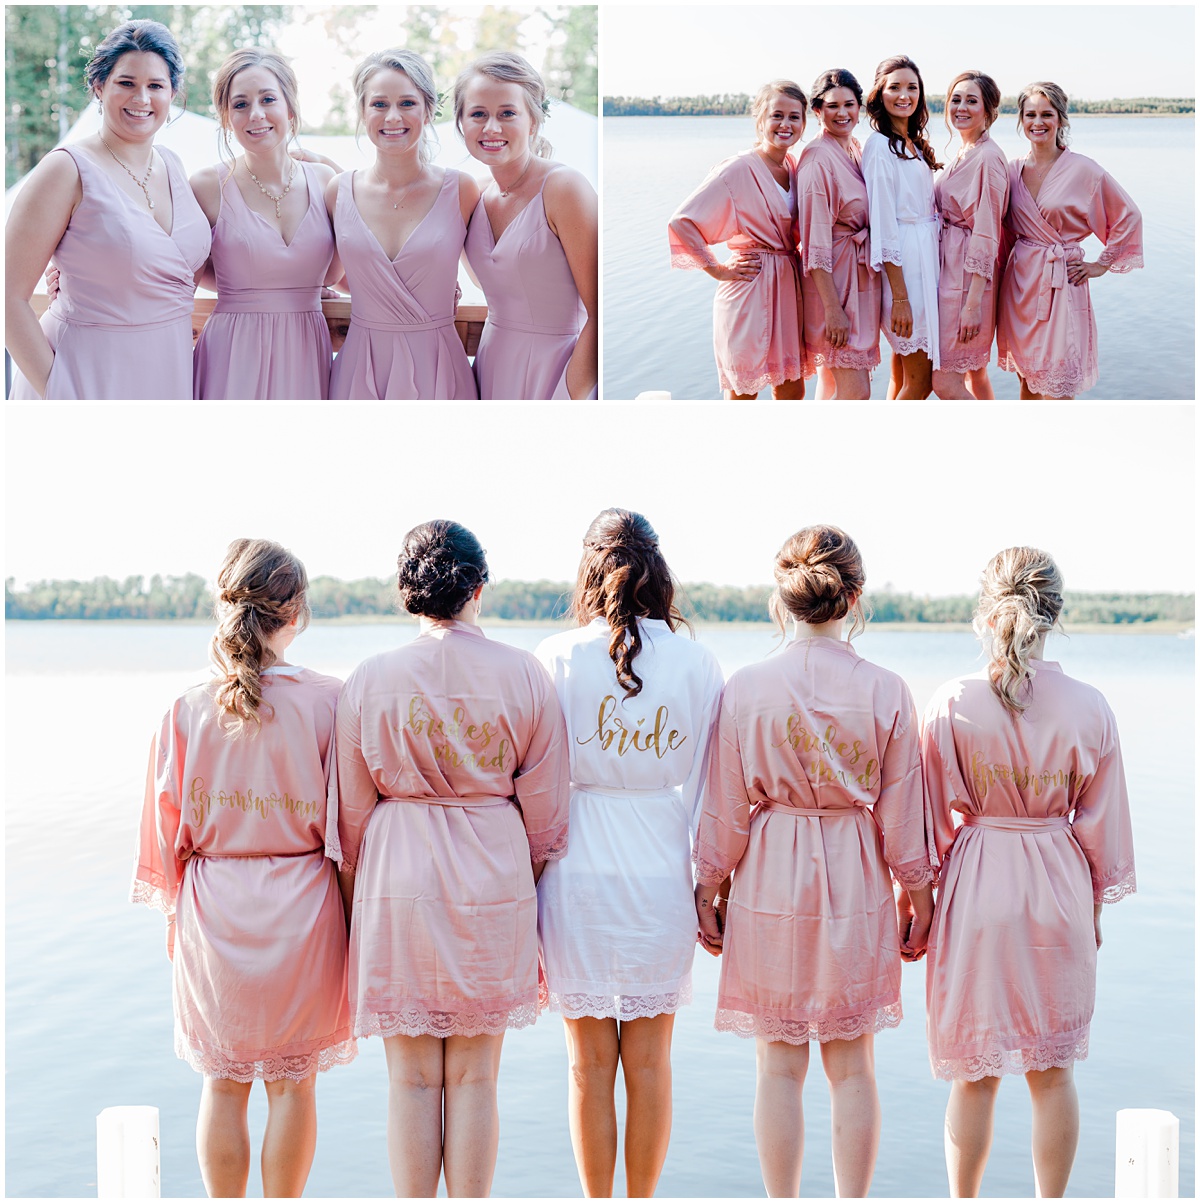 choosing your bridesmaids is one of the most important parts of your wedding. Cute bridesmaids photos by Comfort and Cashmere